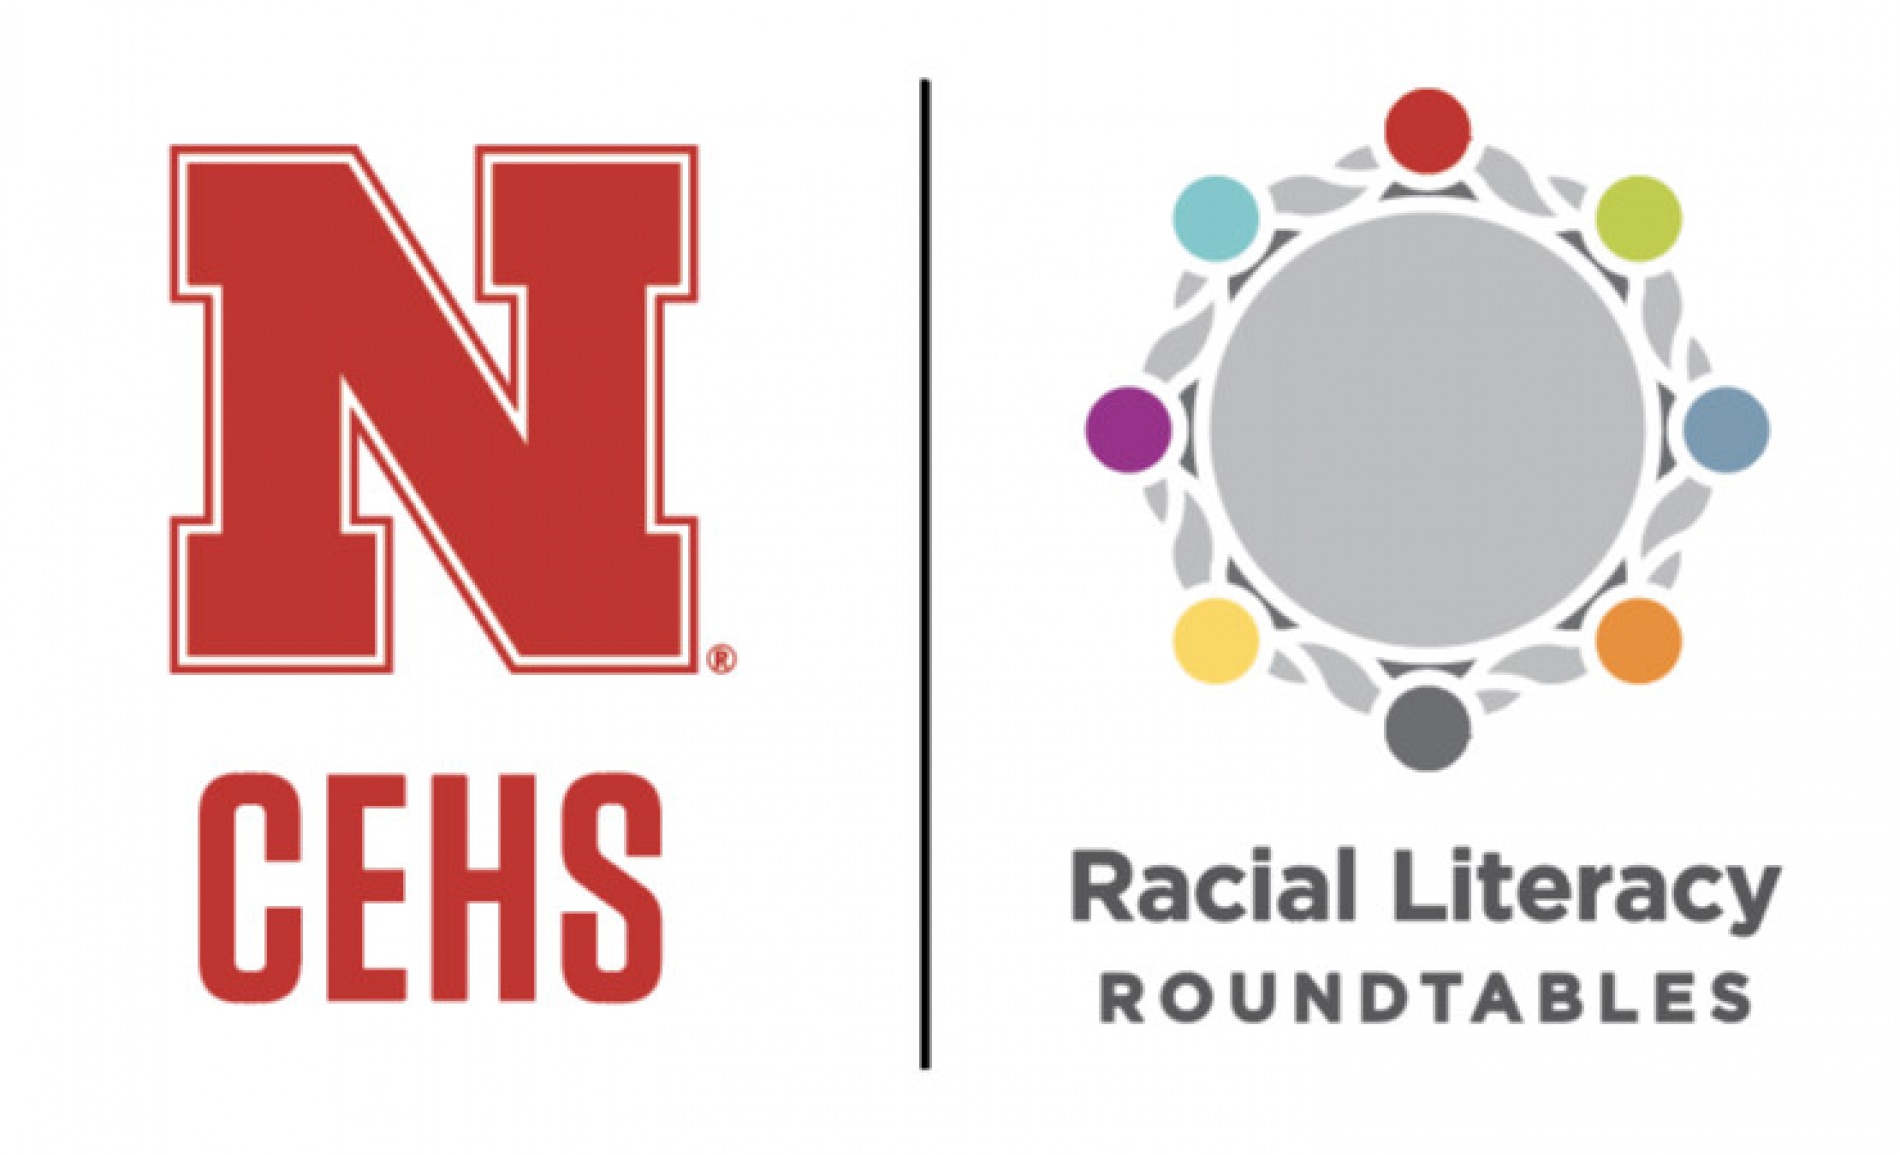 Graphic with a red CEHS logo next to a round and colorful Racial Literacy Roundtables logo. 